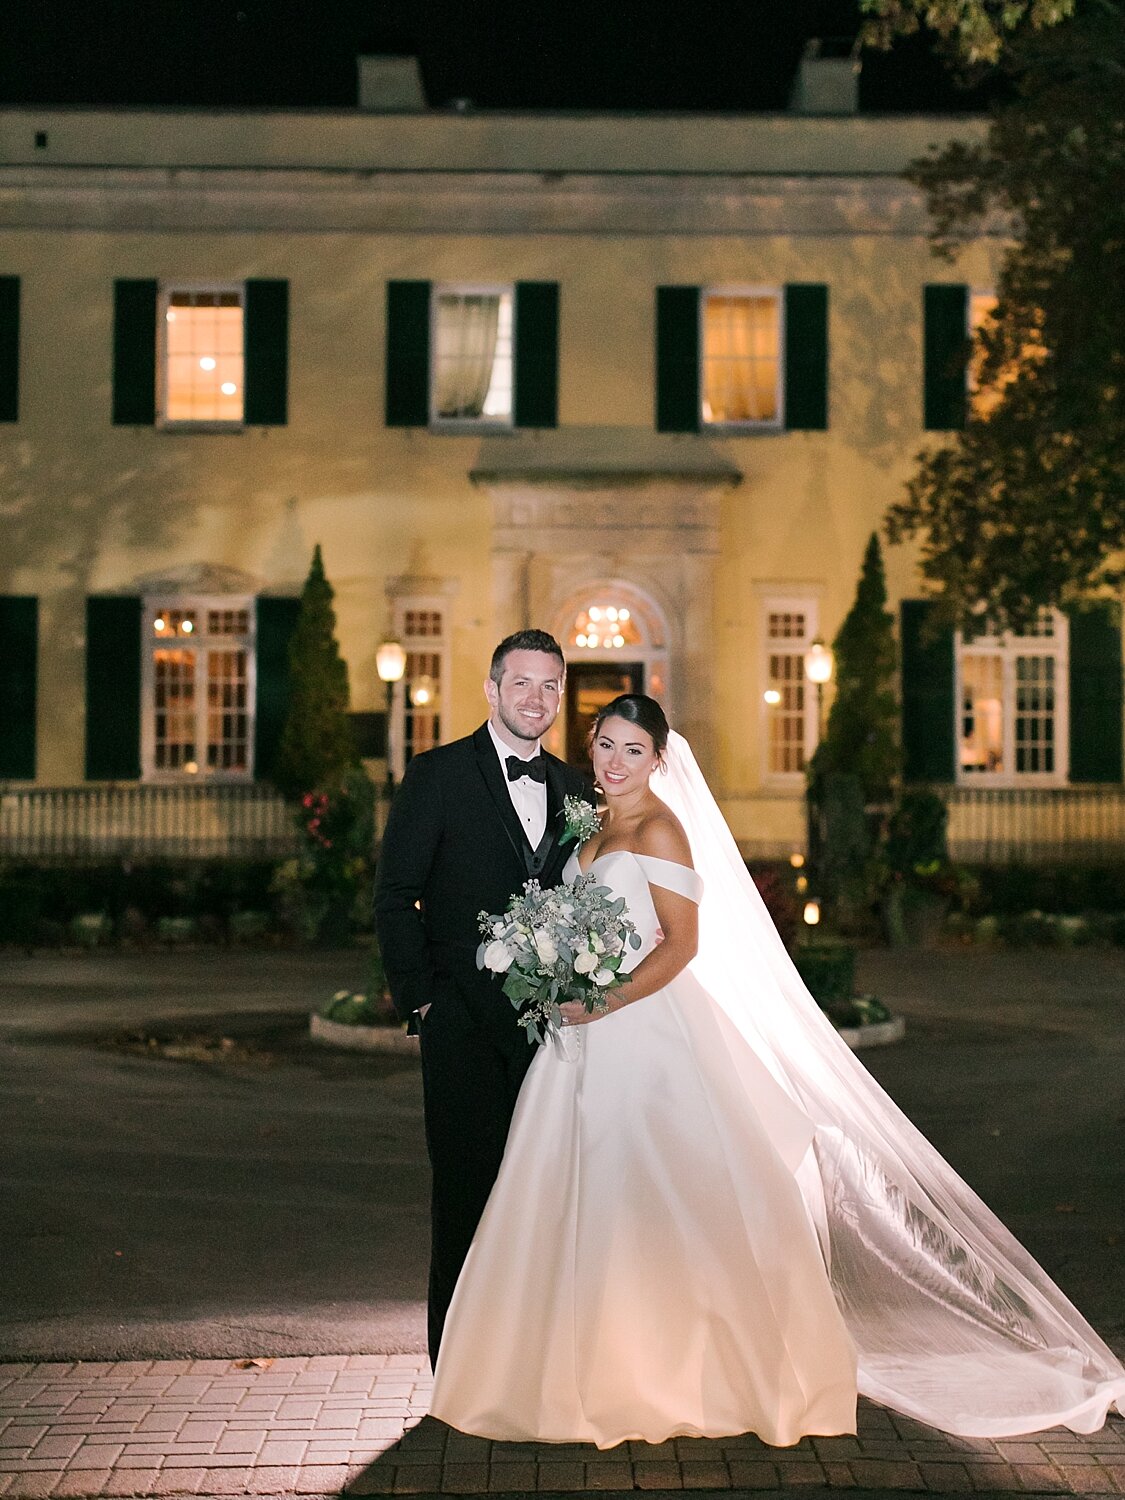 nighttime wedding portraits at the Mansion at Oyster Bay with Asher Gardner Photography